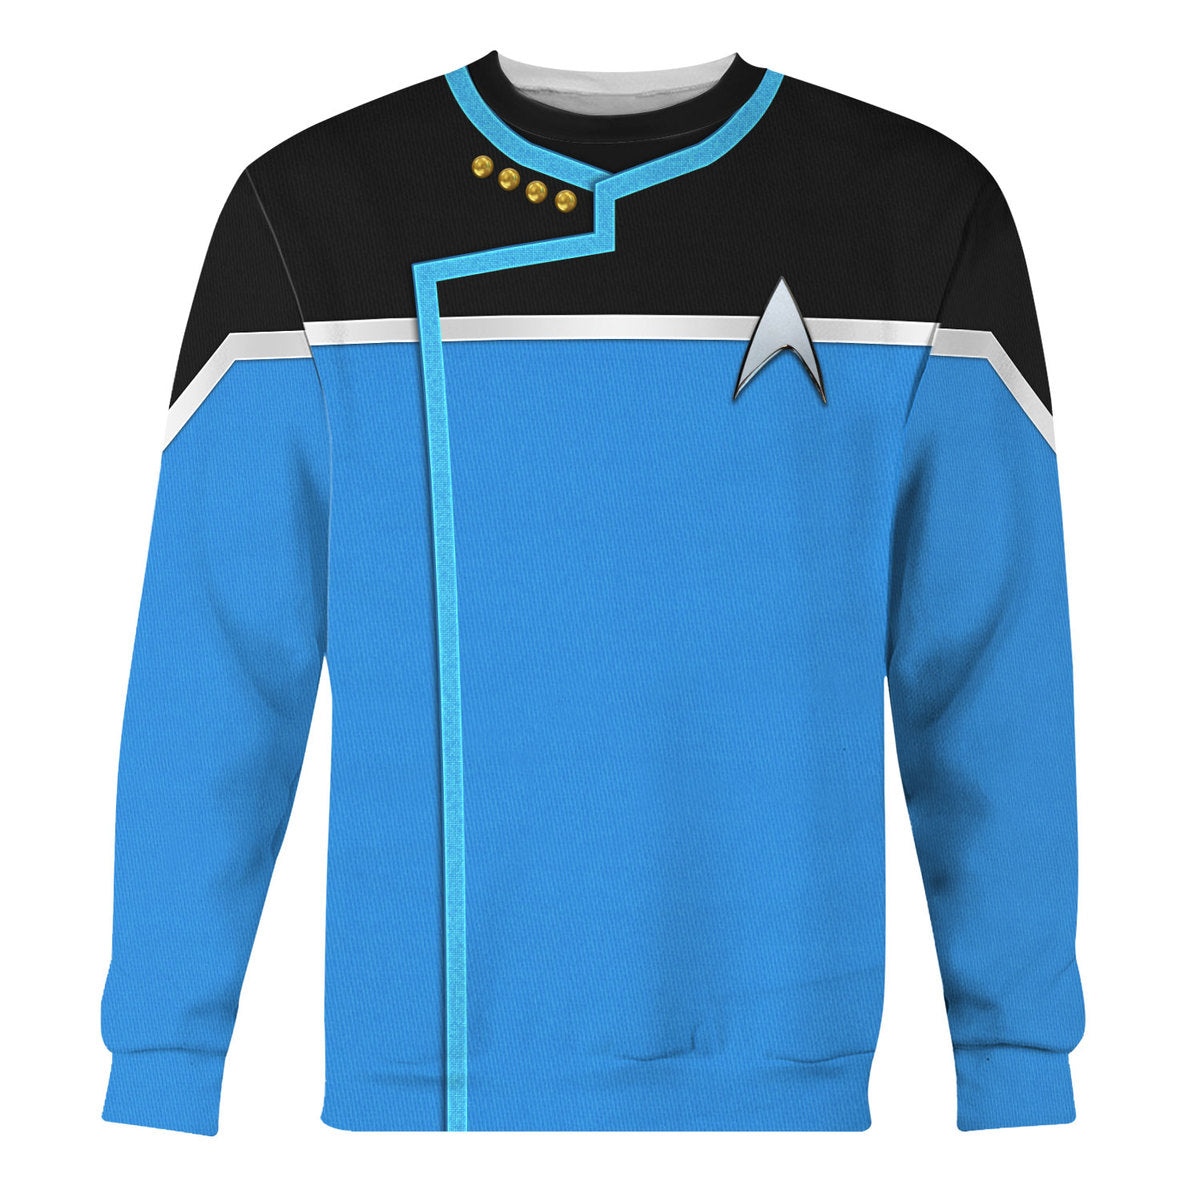 Star Trek Dress Uniform Science Division Cool - Sweater - Ugly Christmas Sweater